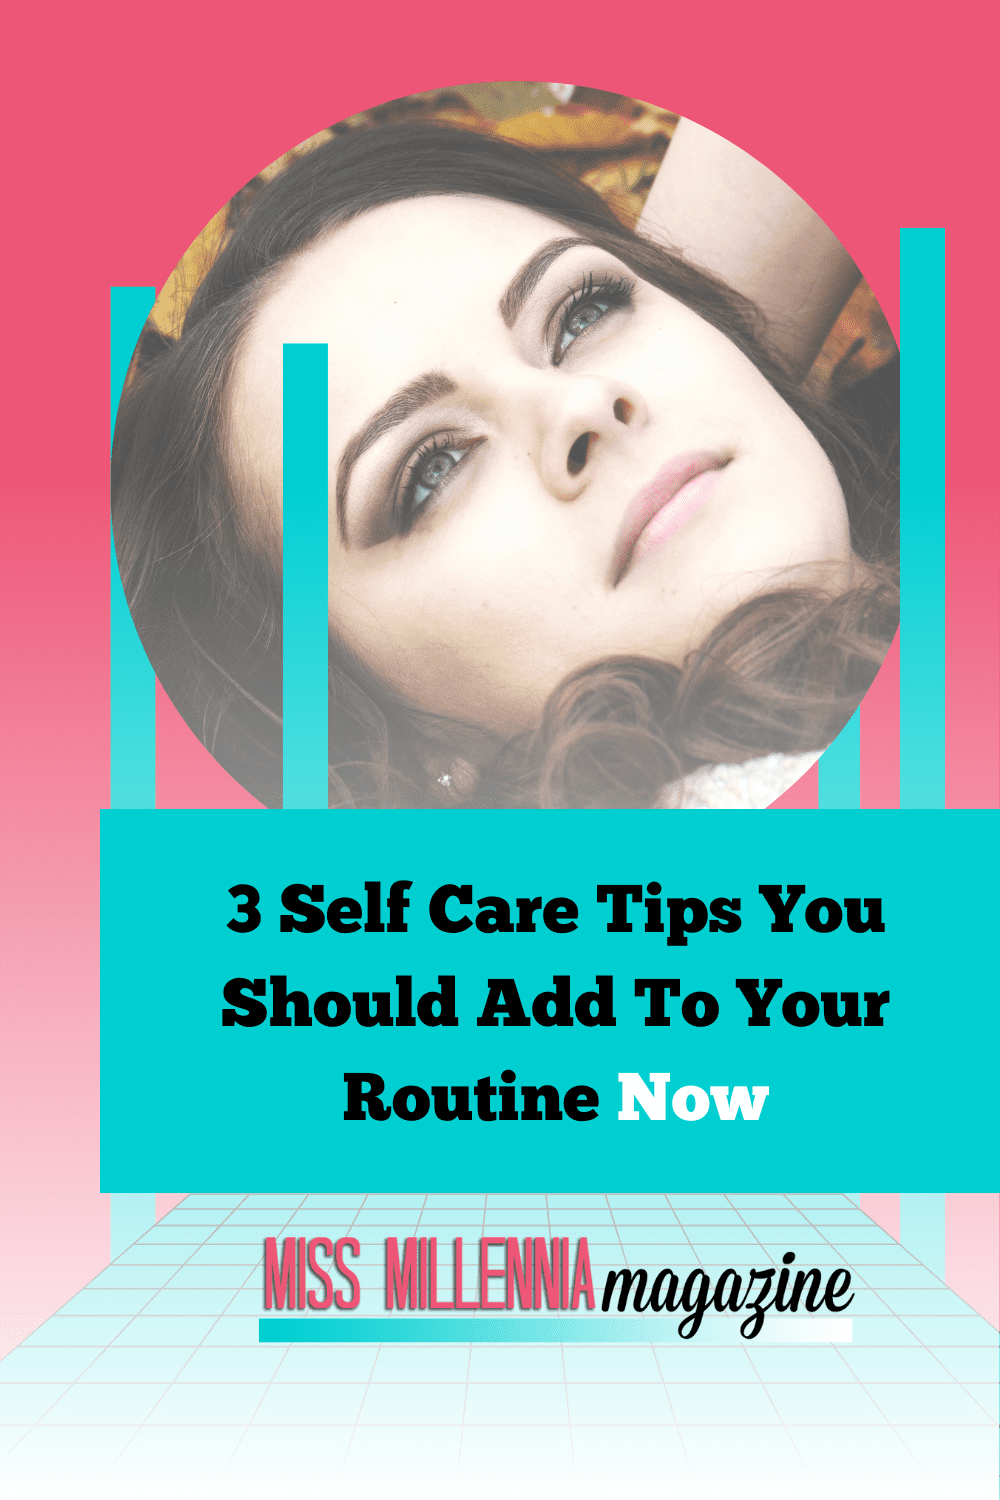 3 Self-Care Tips You Should Add To Your Routine Now